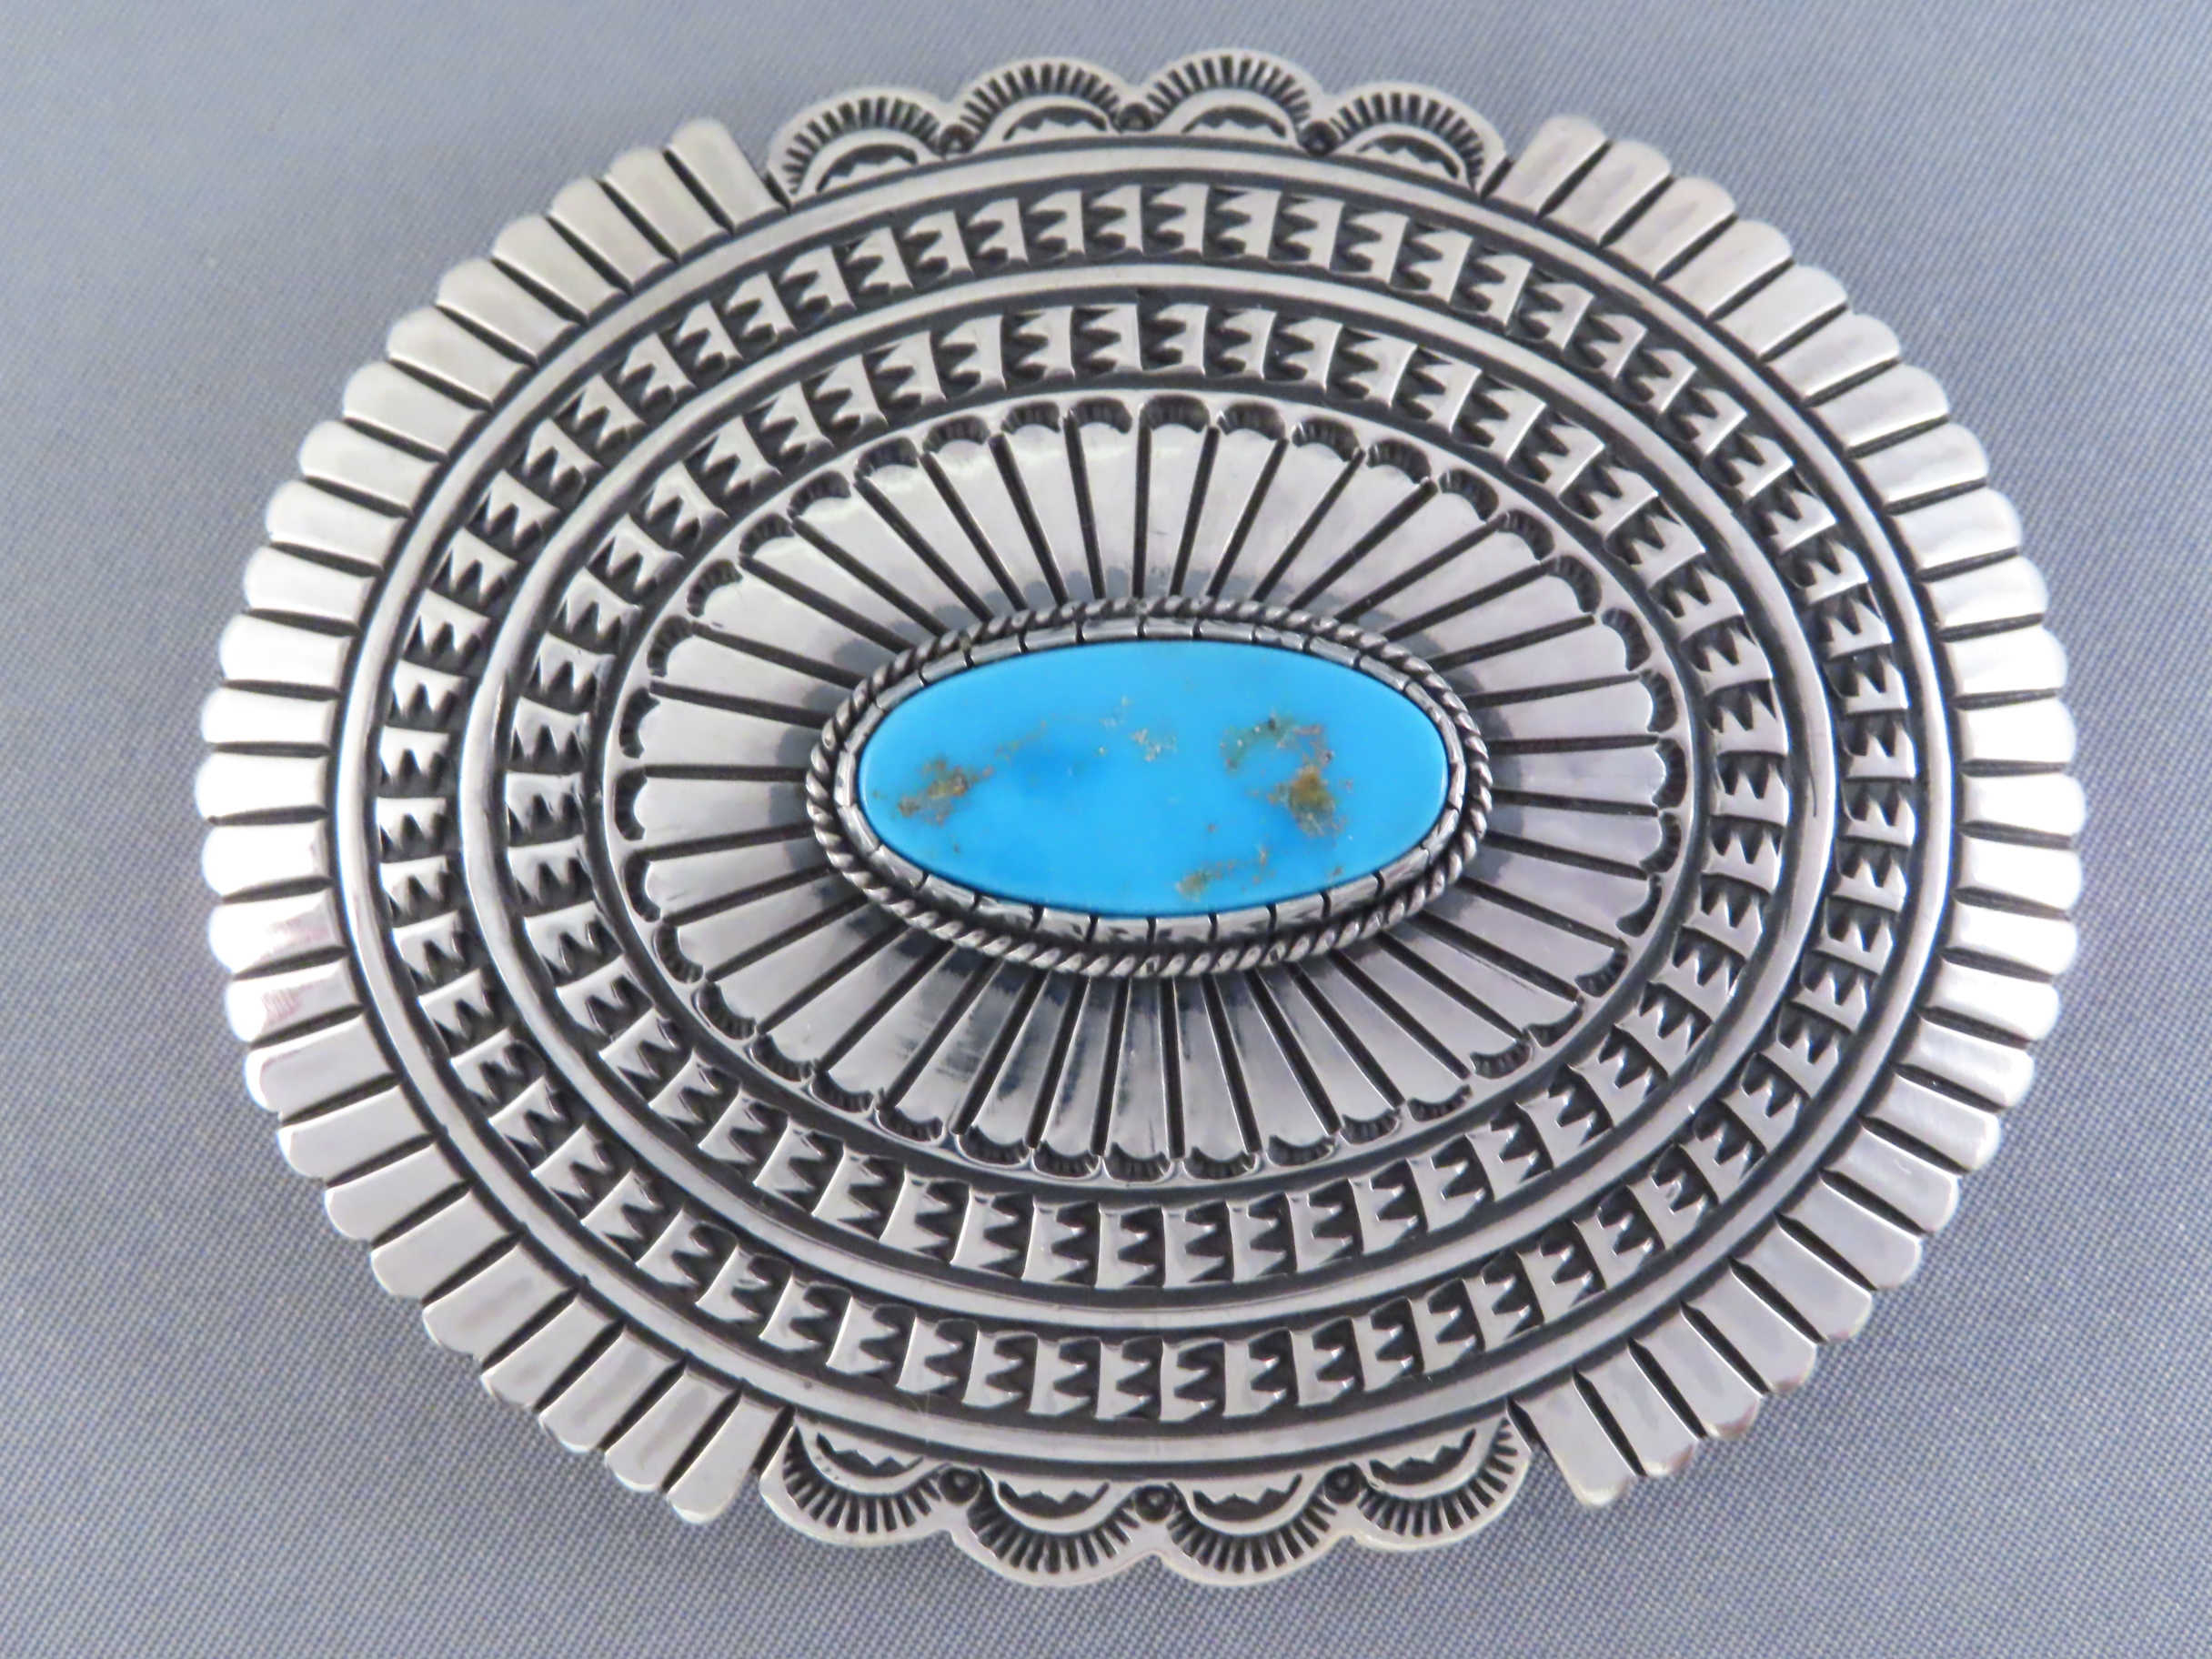 Shop Turquoise Buckle - Blue Gem Turquoise Belt Buckle by Native American Jewelry Artist, Tsosie Orville White $785- FOR SALE